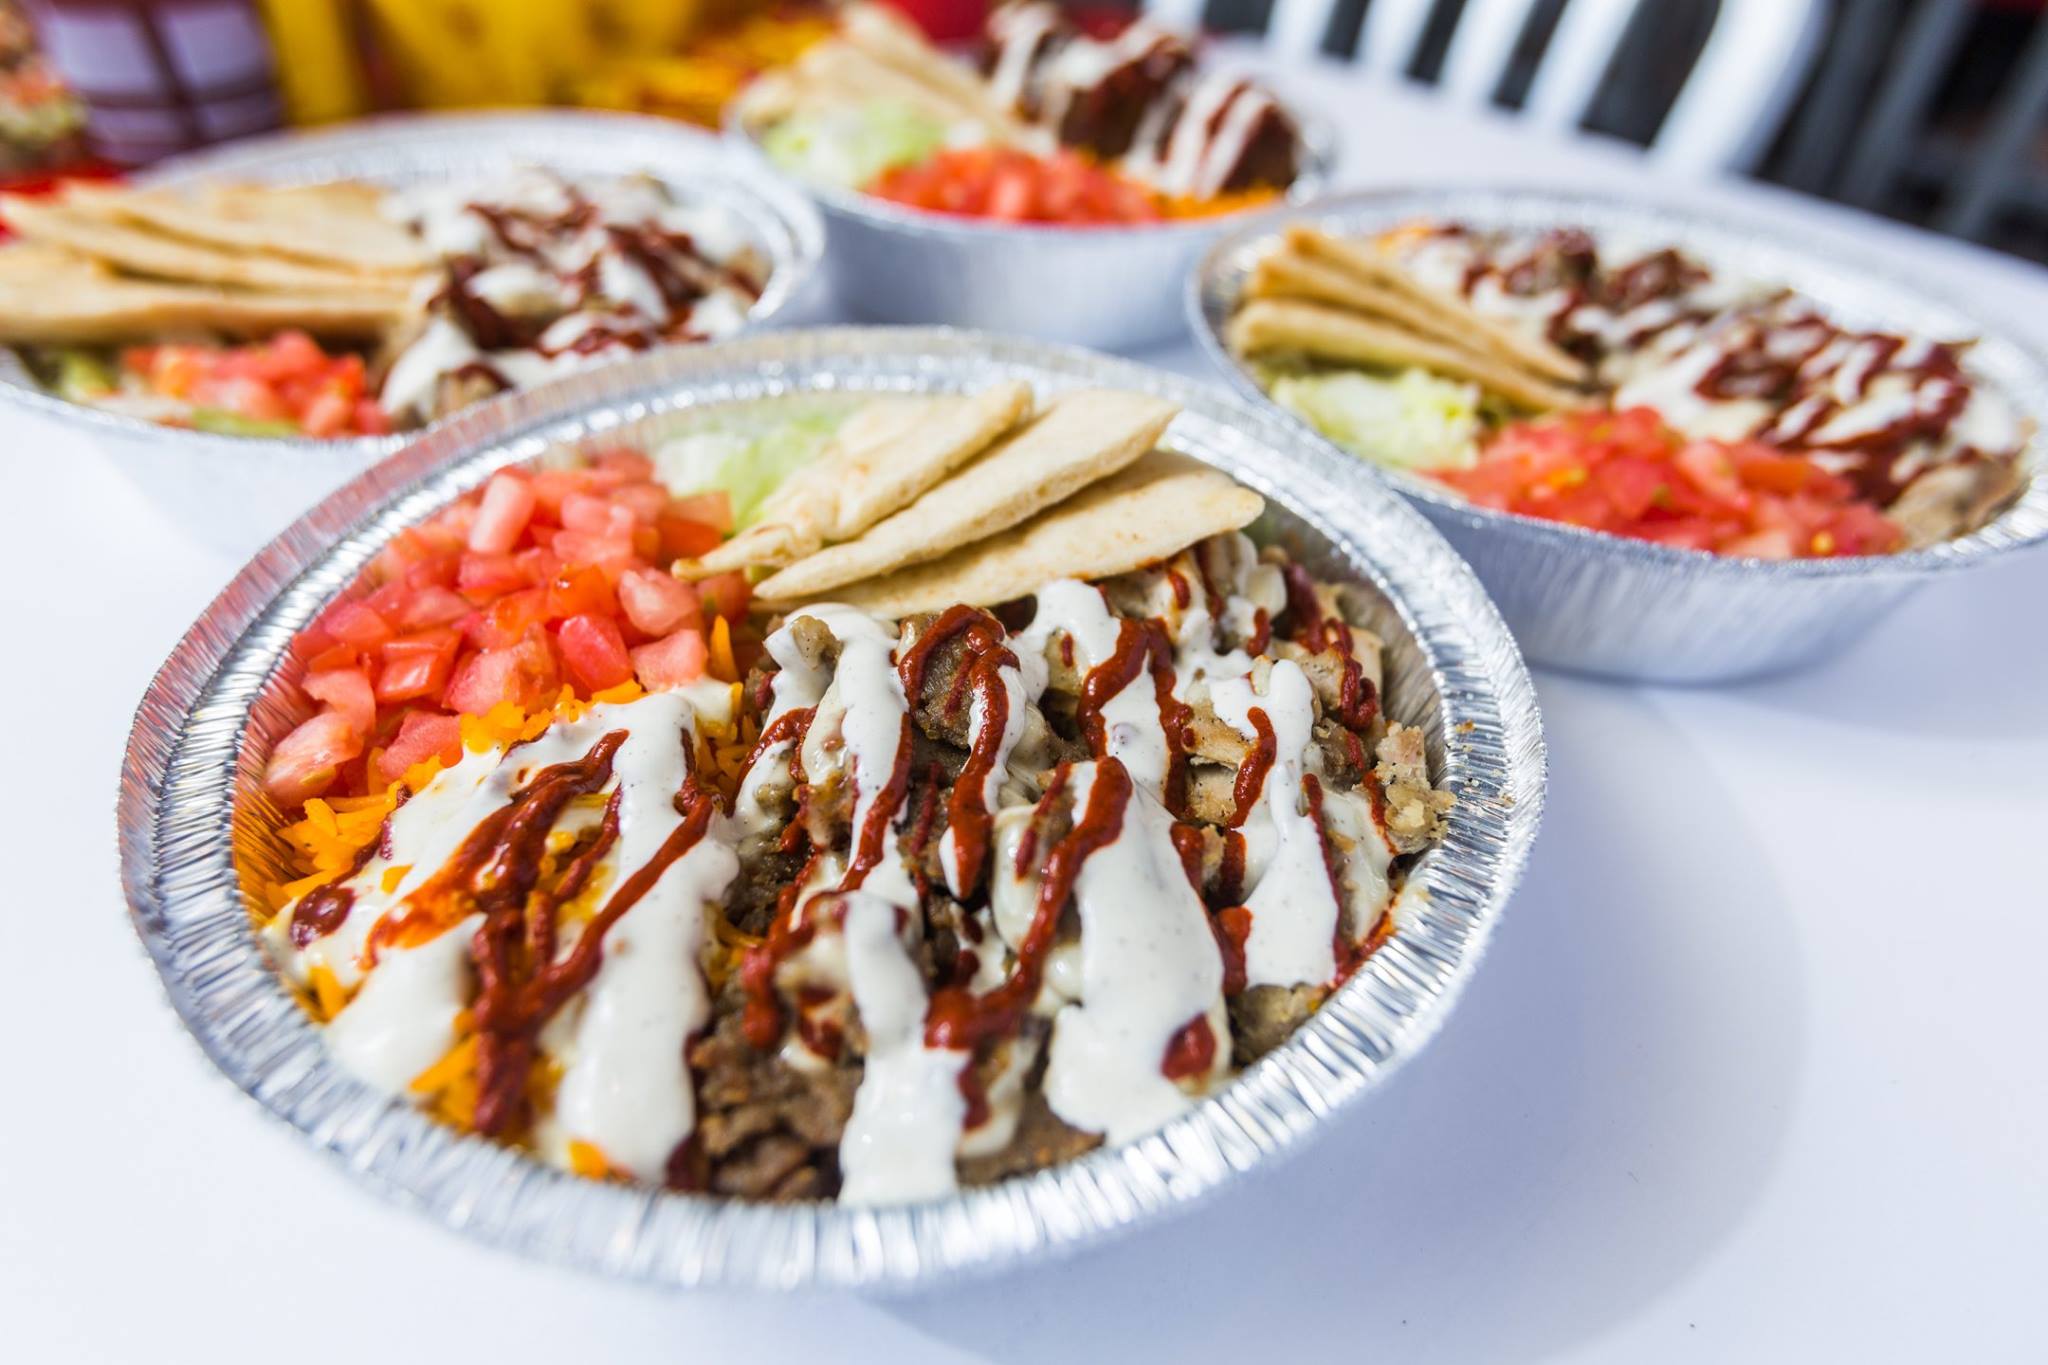 A foil bowl full of gyros and drizzle with white and red sauces.